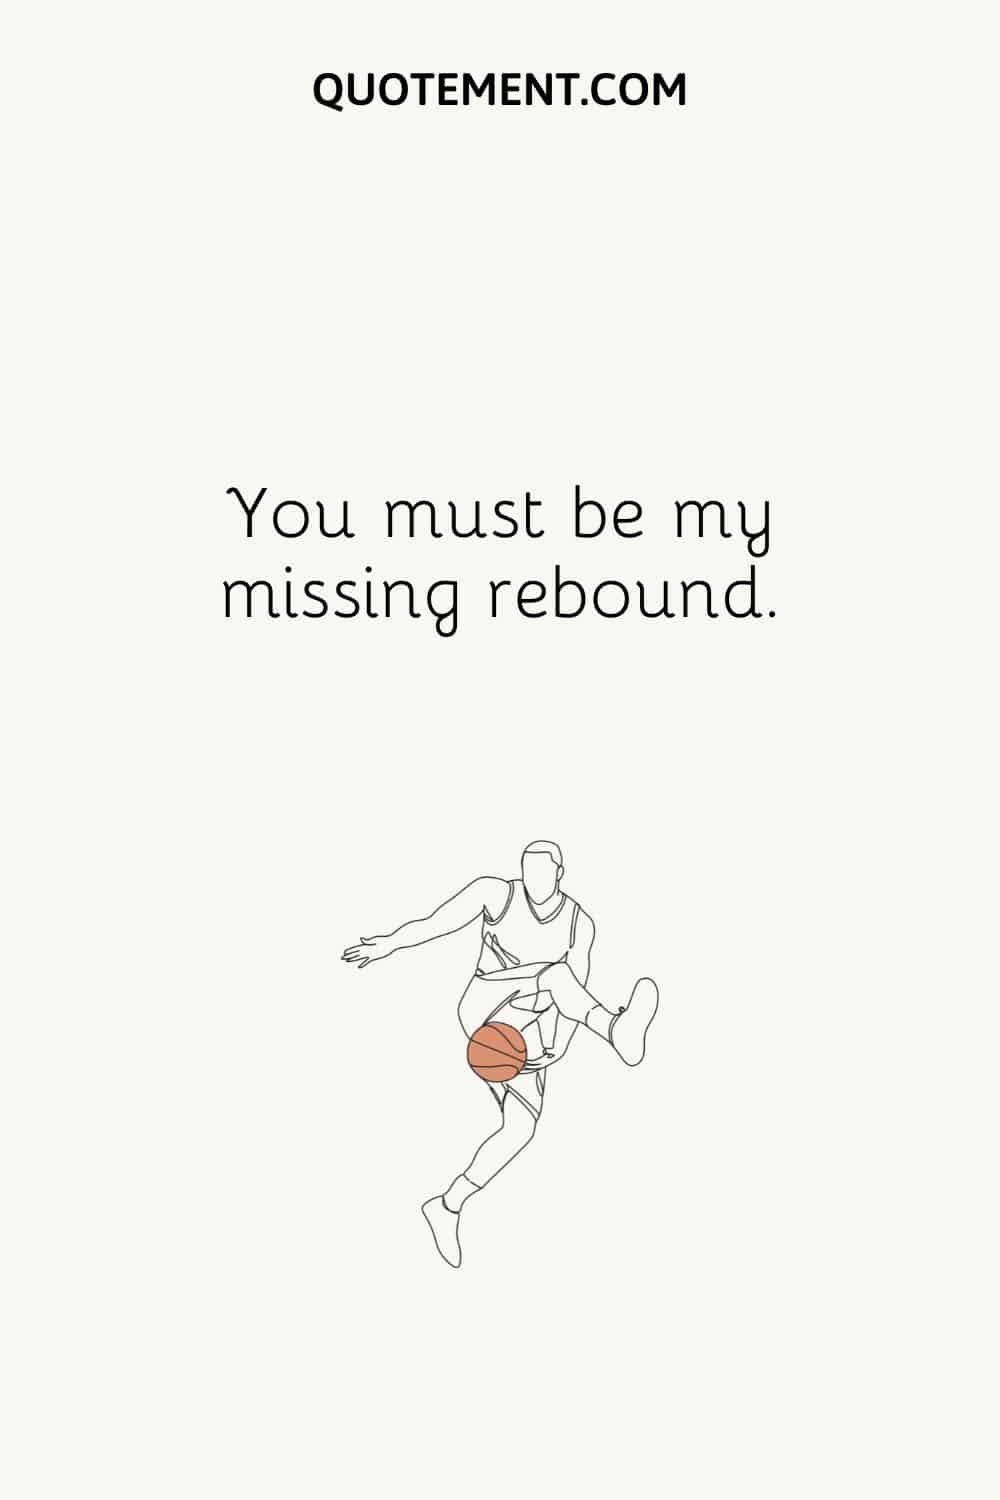 You must be my missing rebound